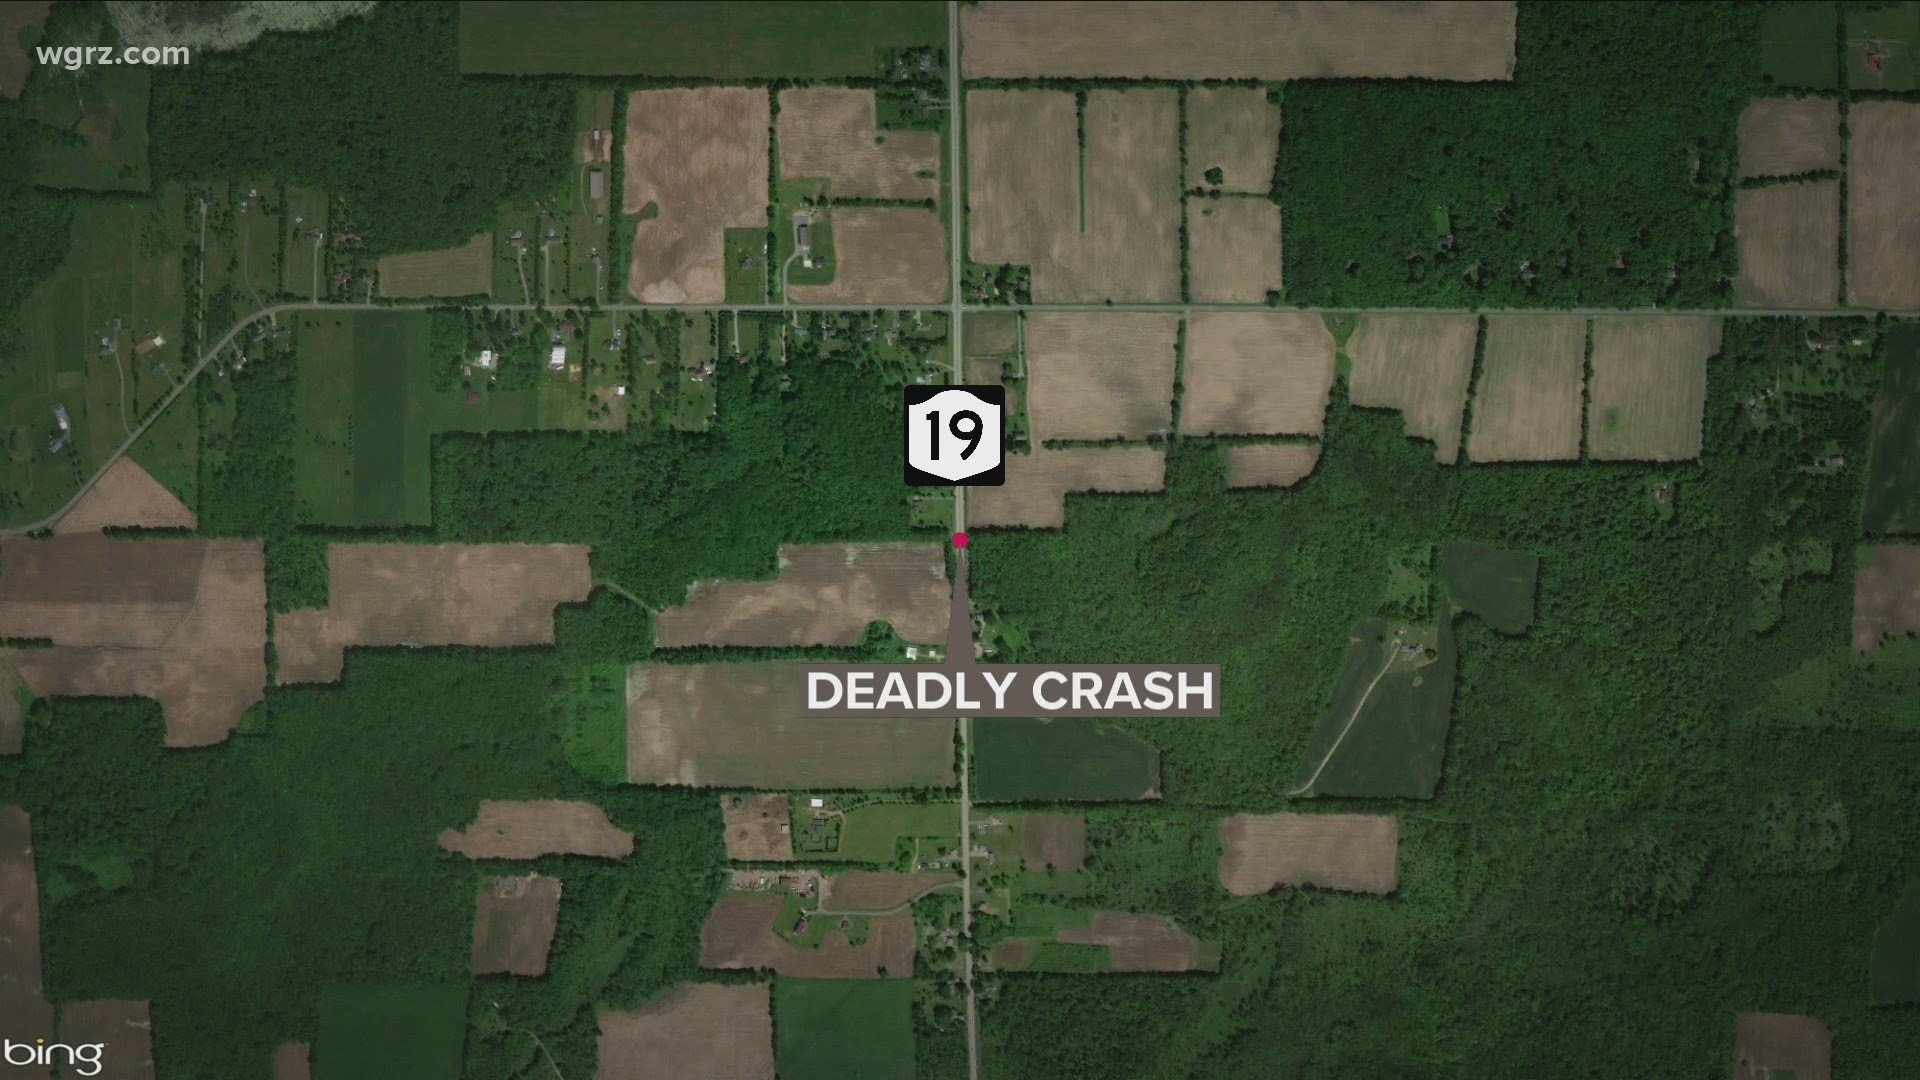 Genesee Co. Sheriff's Office said a 74-year-old woman died at the scene. An 82-year-old man taken to a Rochester hospital later succumbed to his injuries.